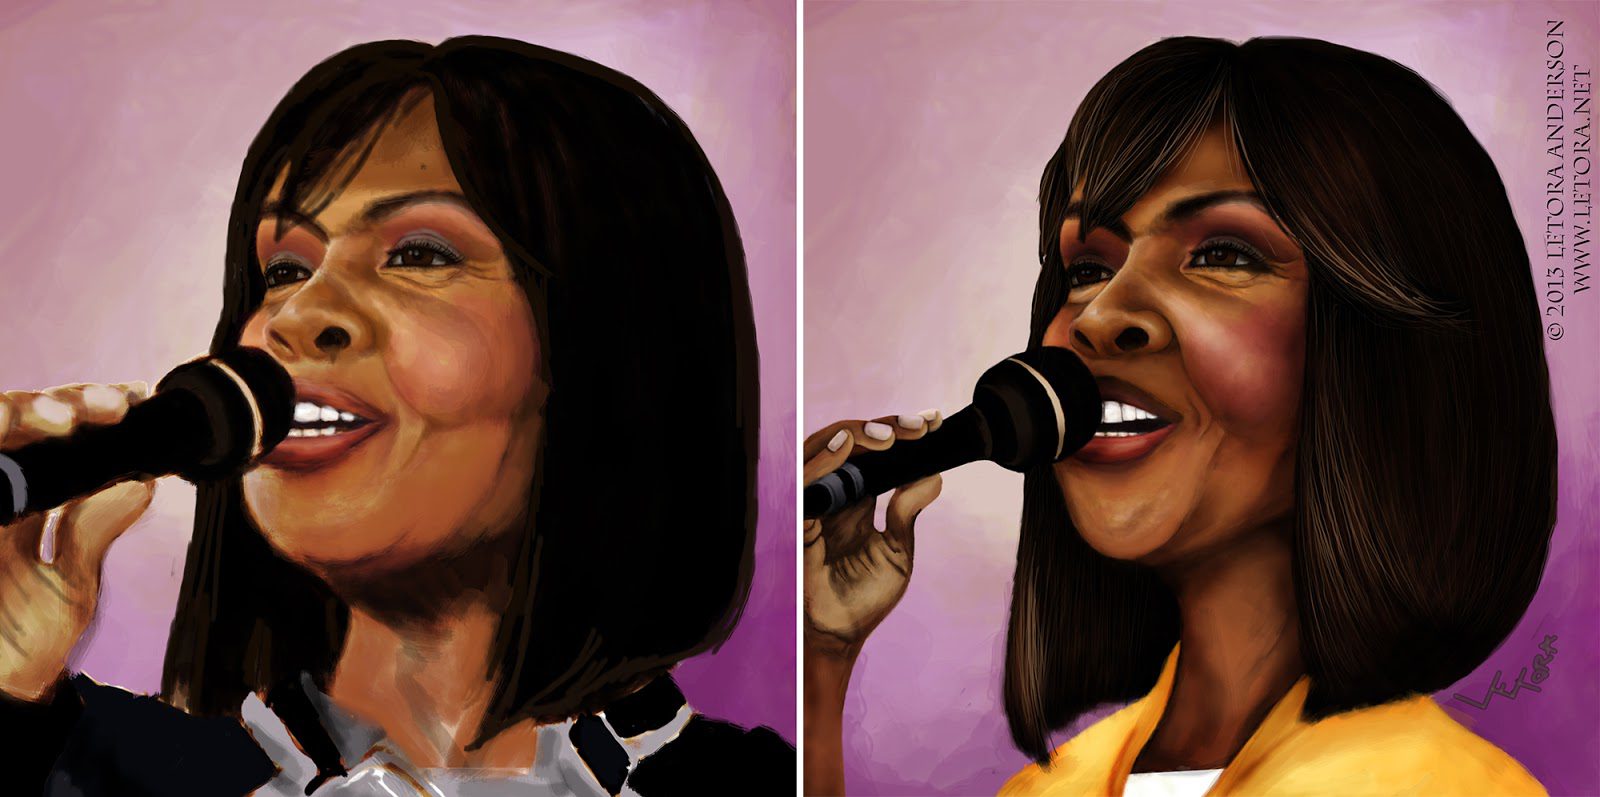 CeCe Winans Caricature: Using More Than One Photo